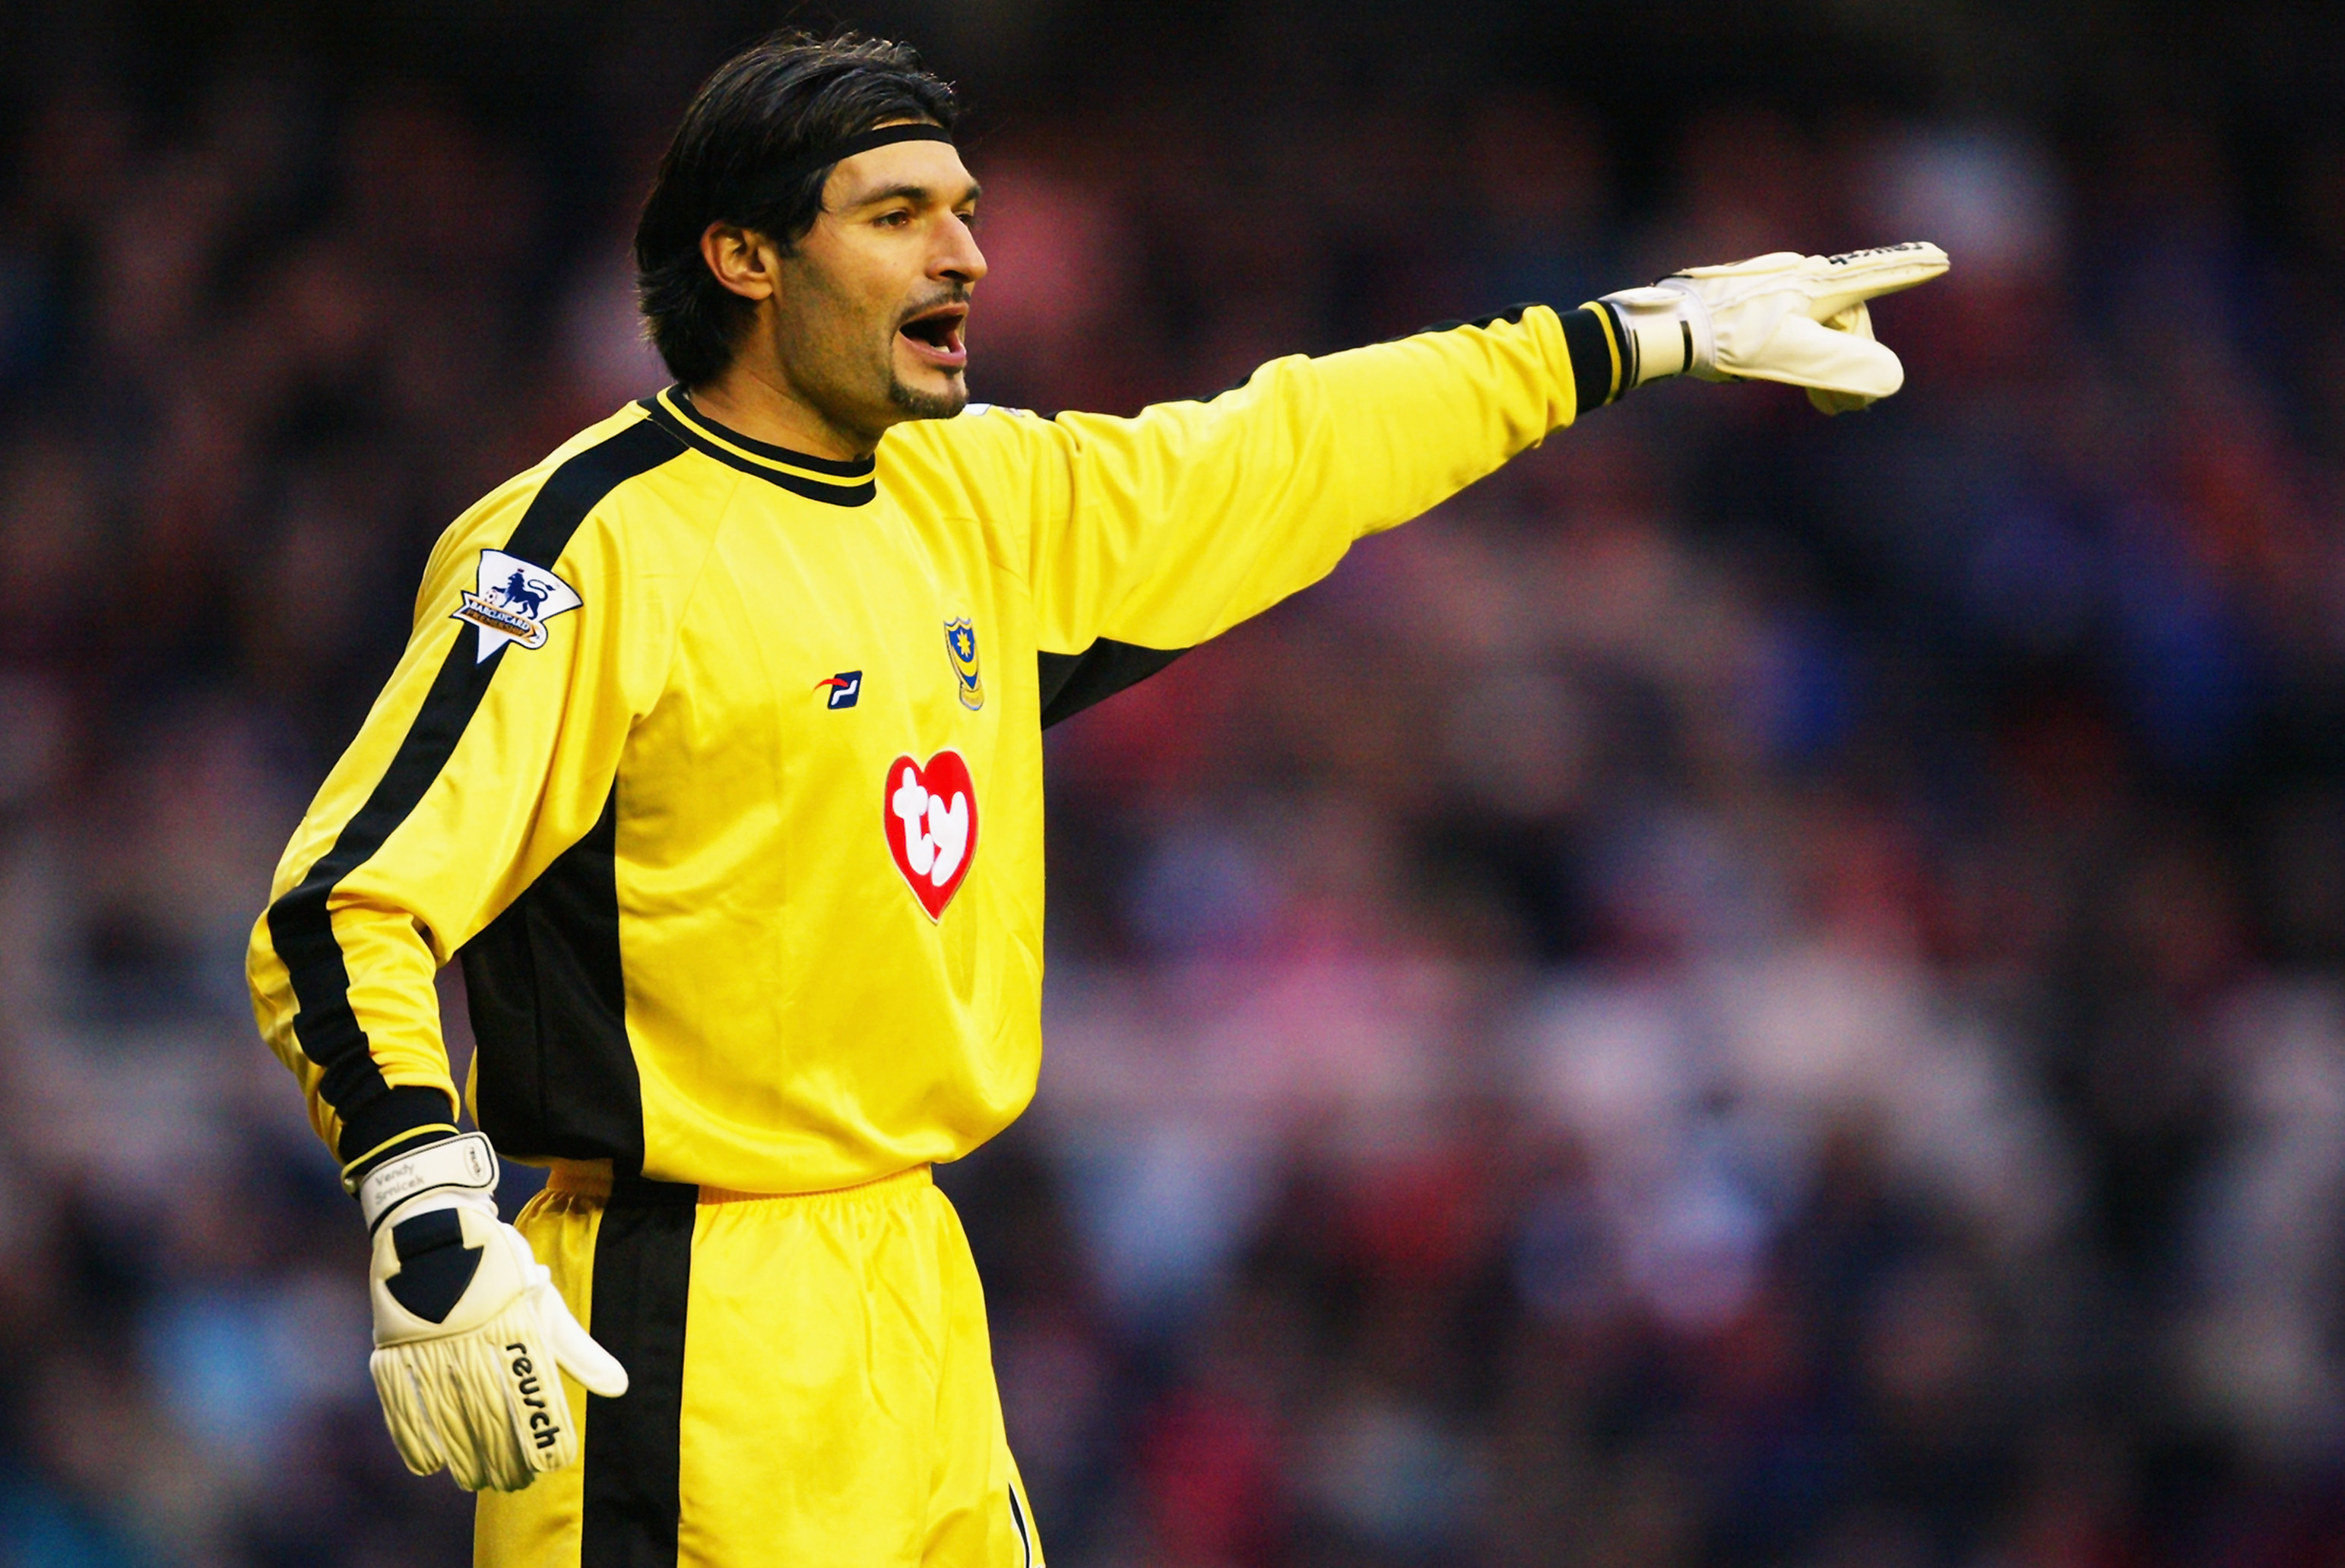 Pavel Srnicek of Portsmouth signals to a team mate